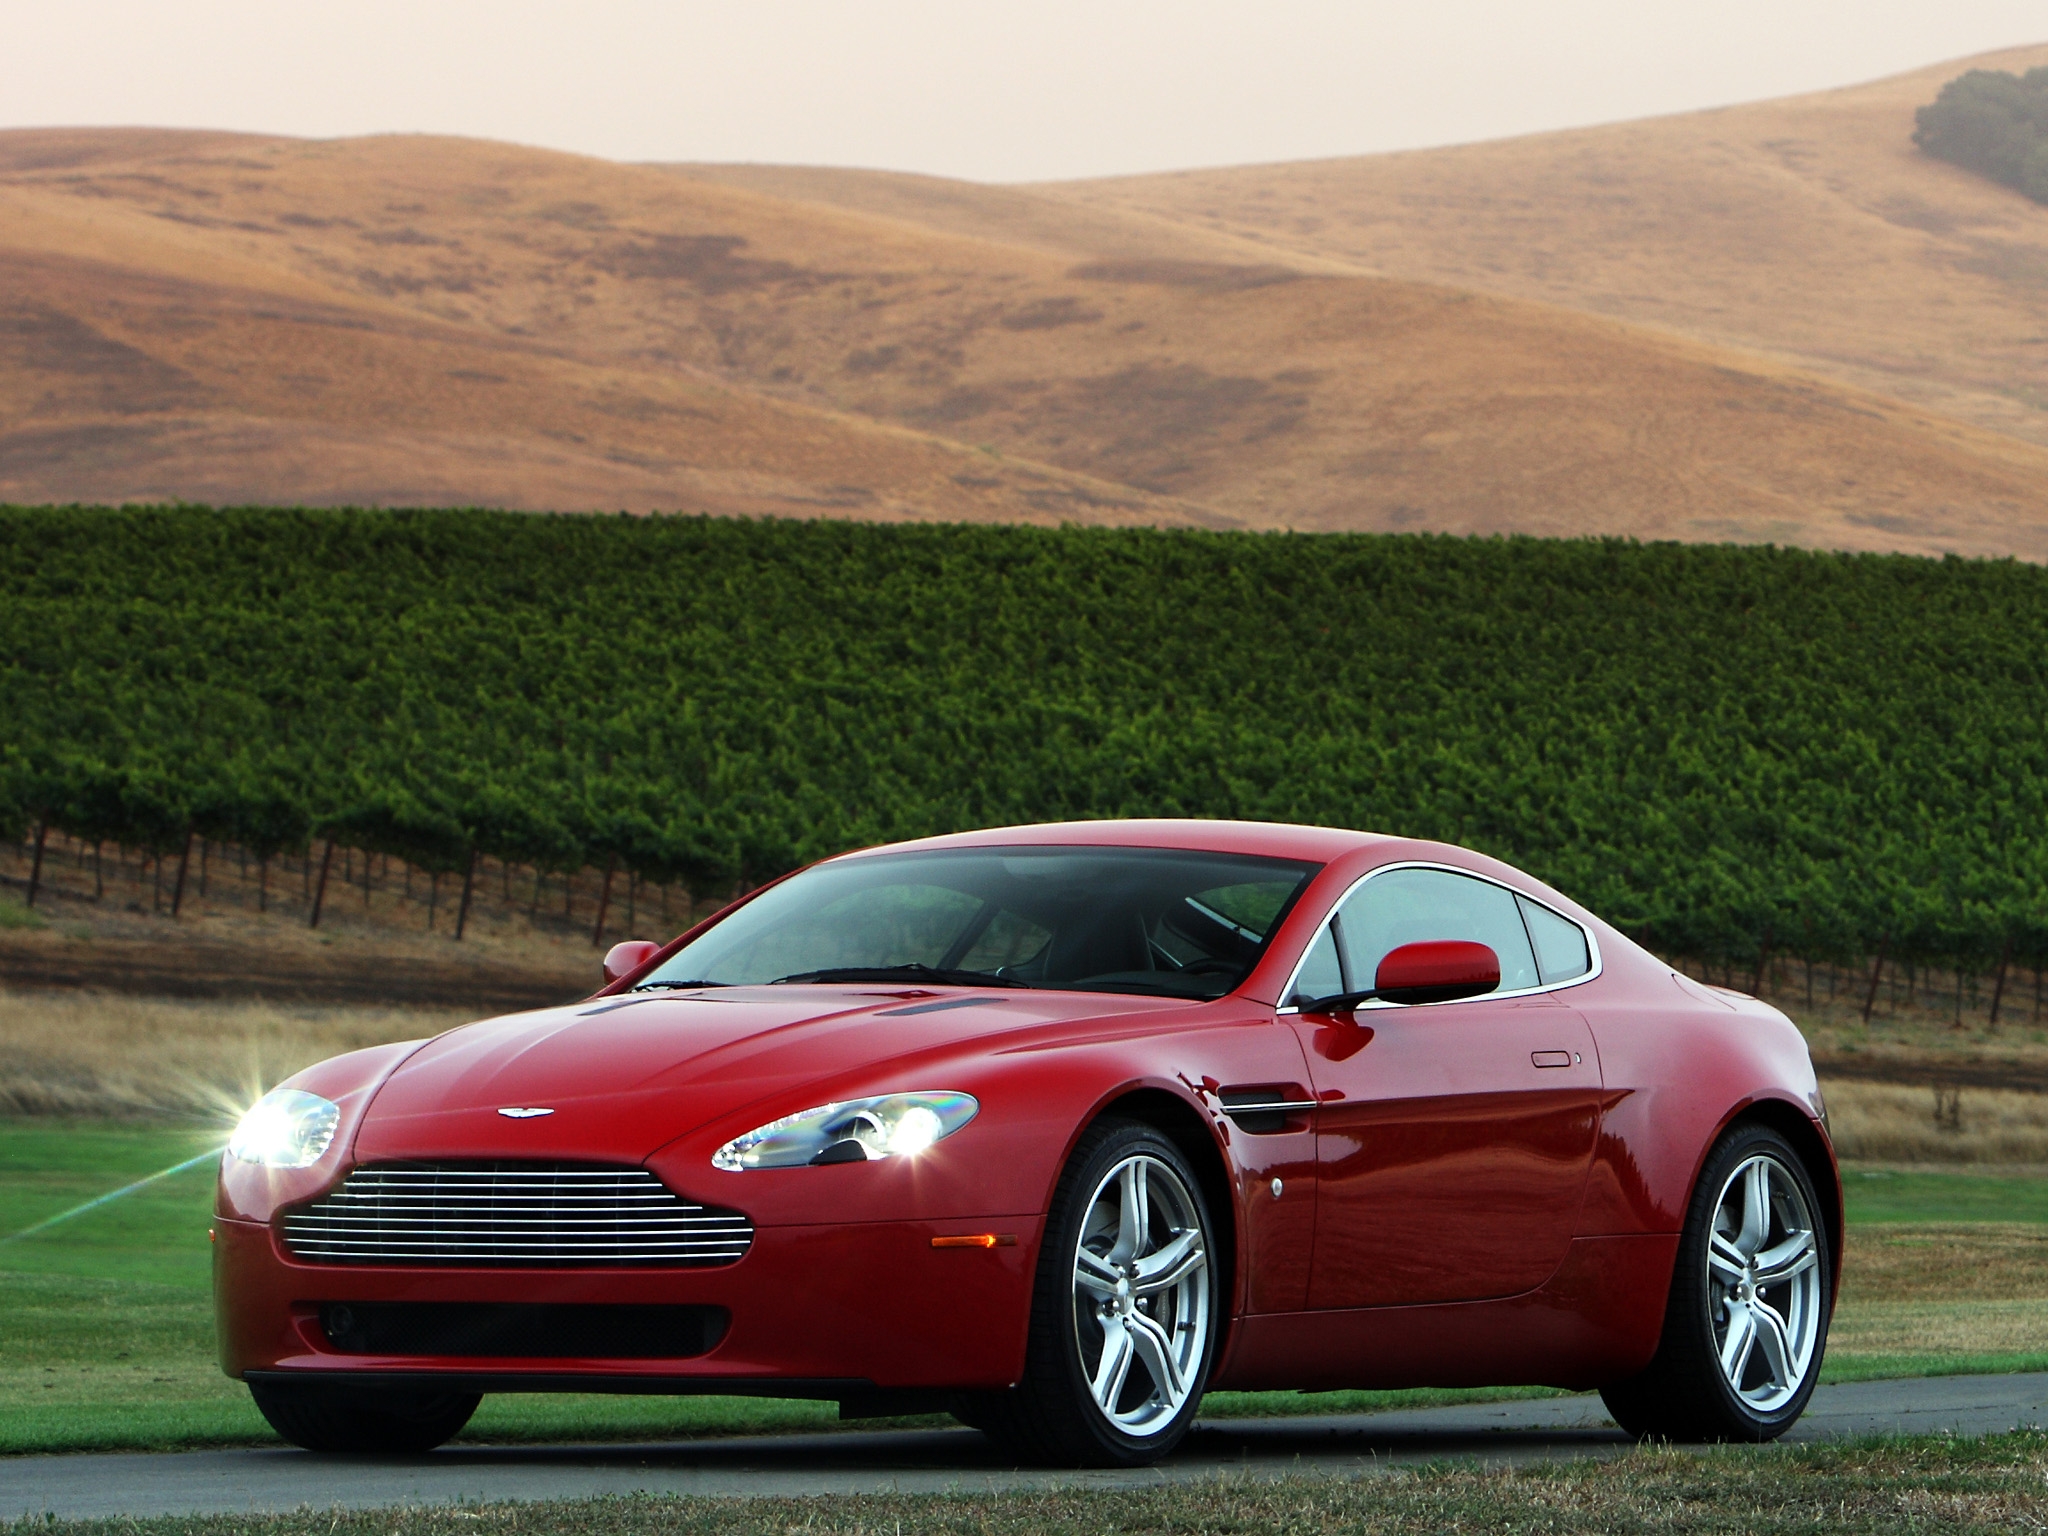 mountains, aston martin, cars, red, front view, style, 2008, v8, vantage